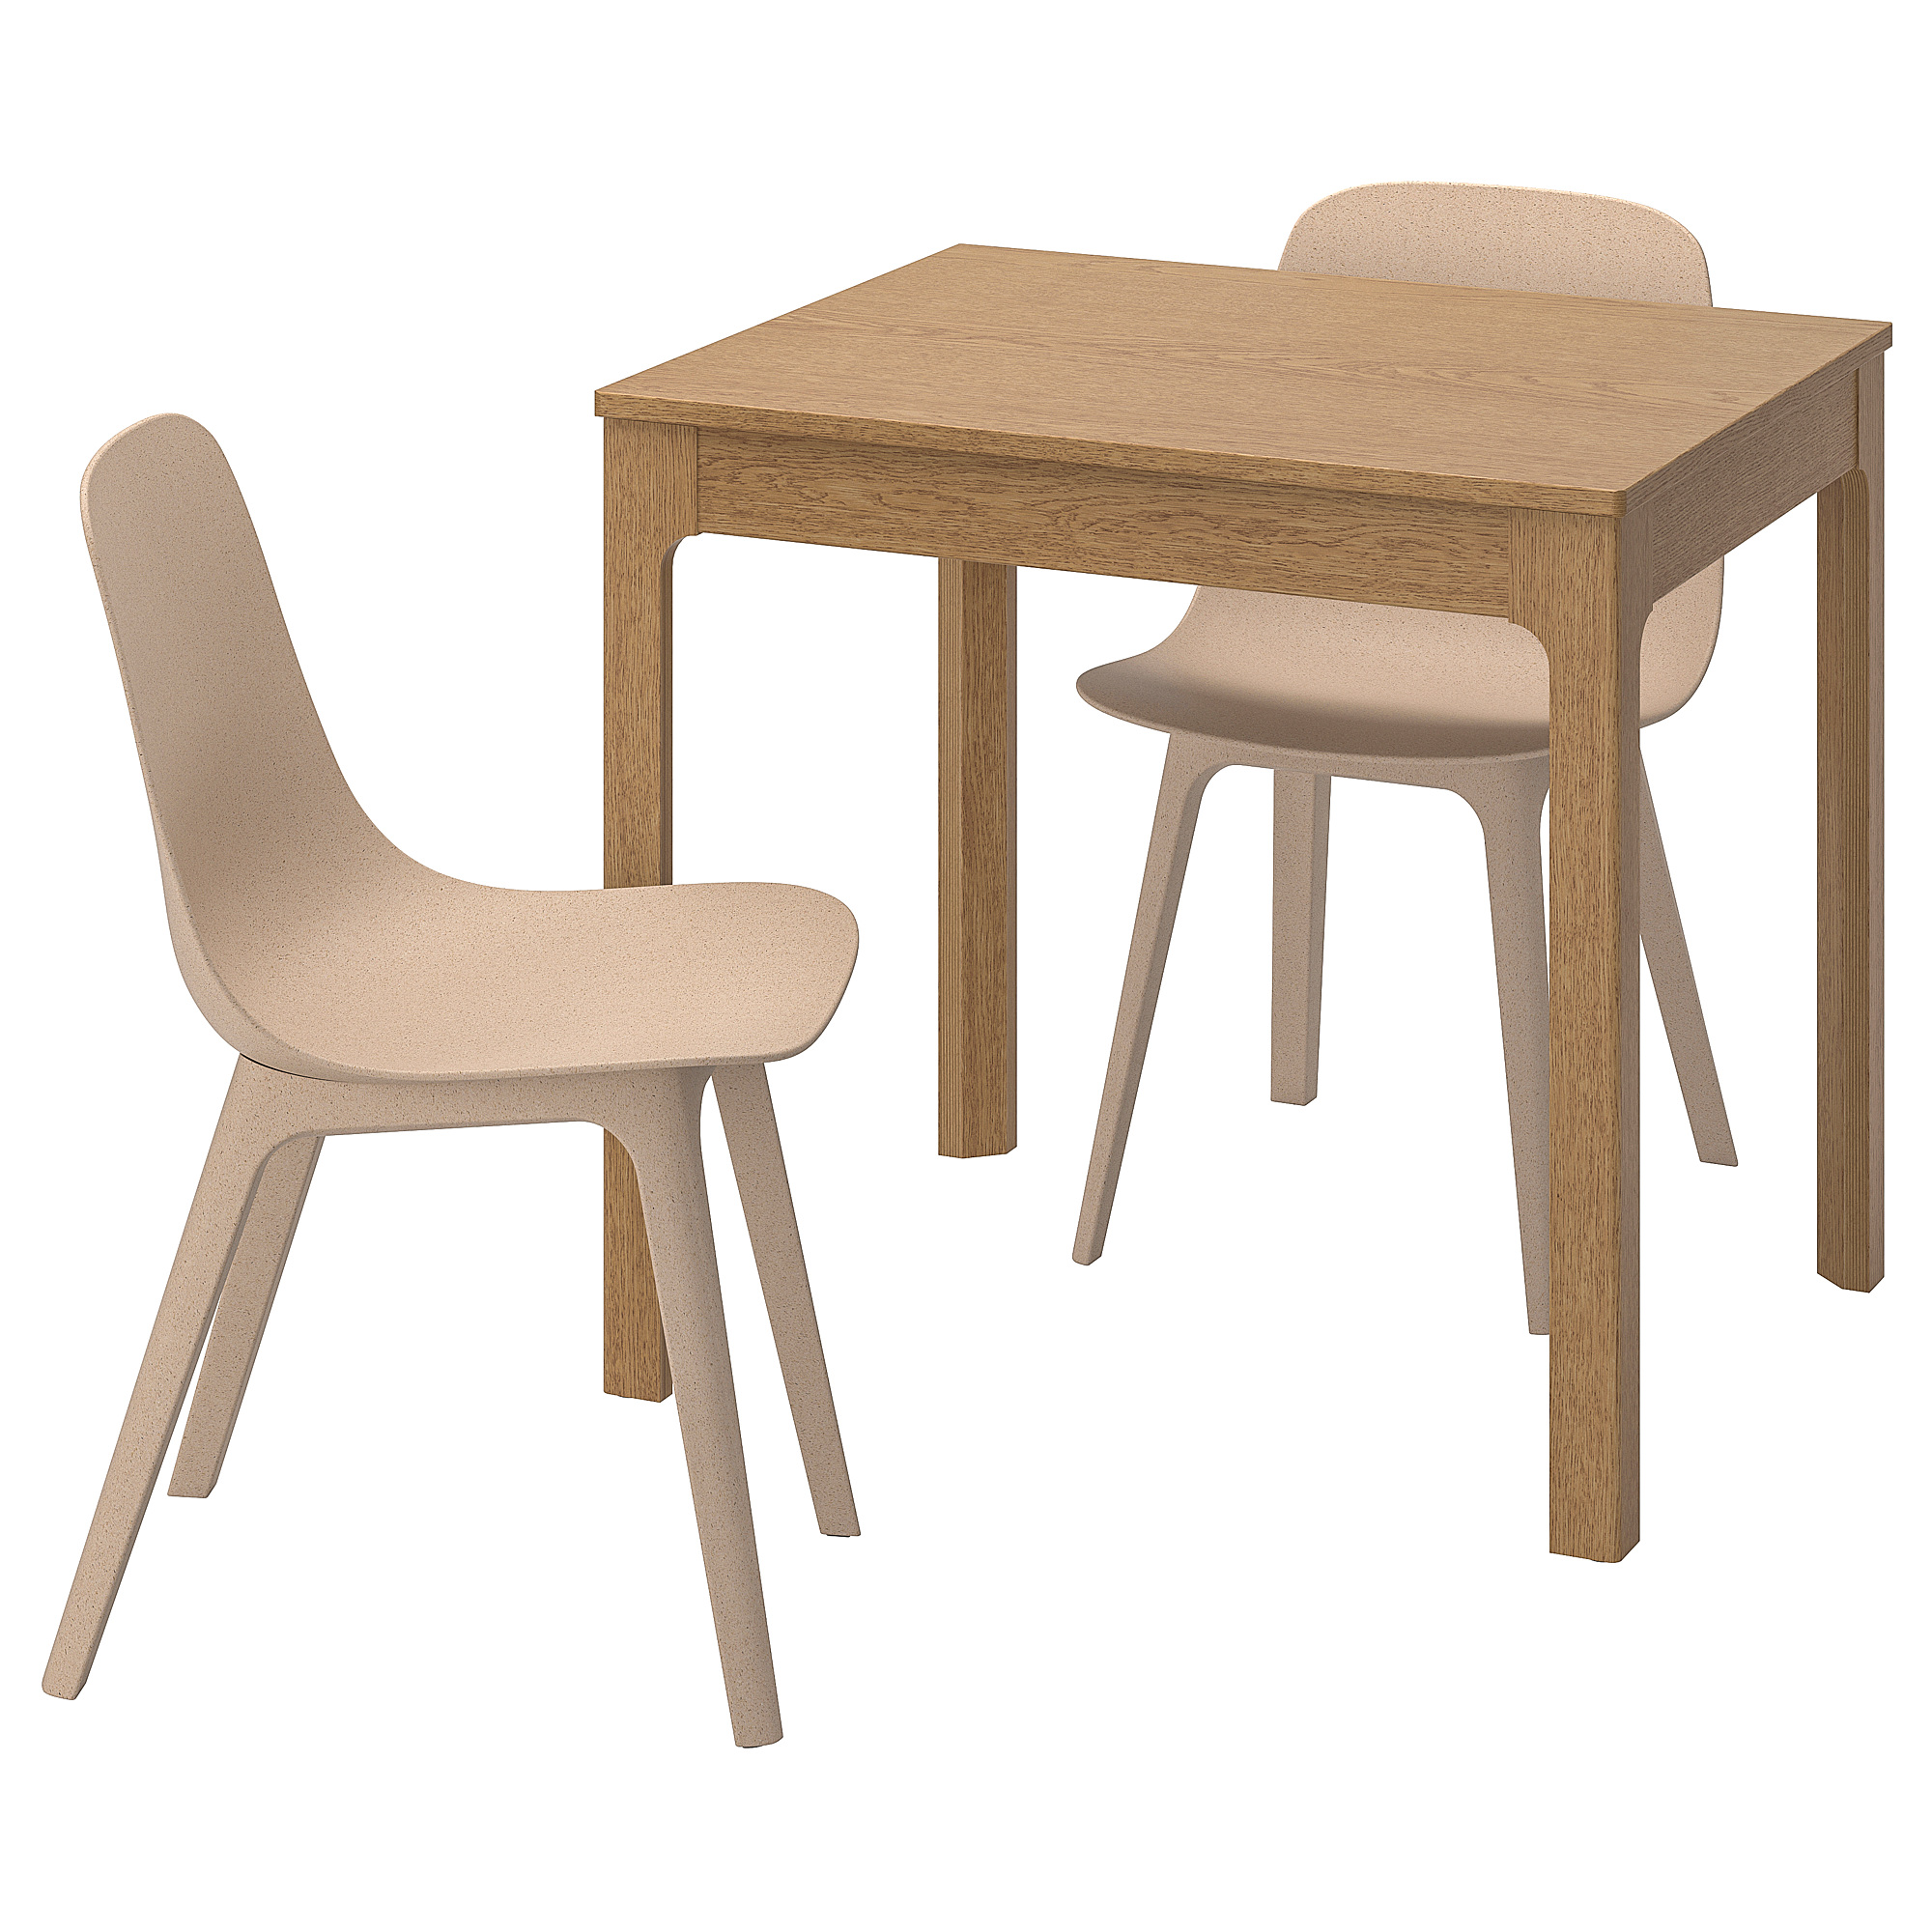 EKEDALEN/ODGER table and 2 chairs